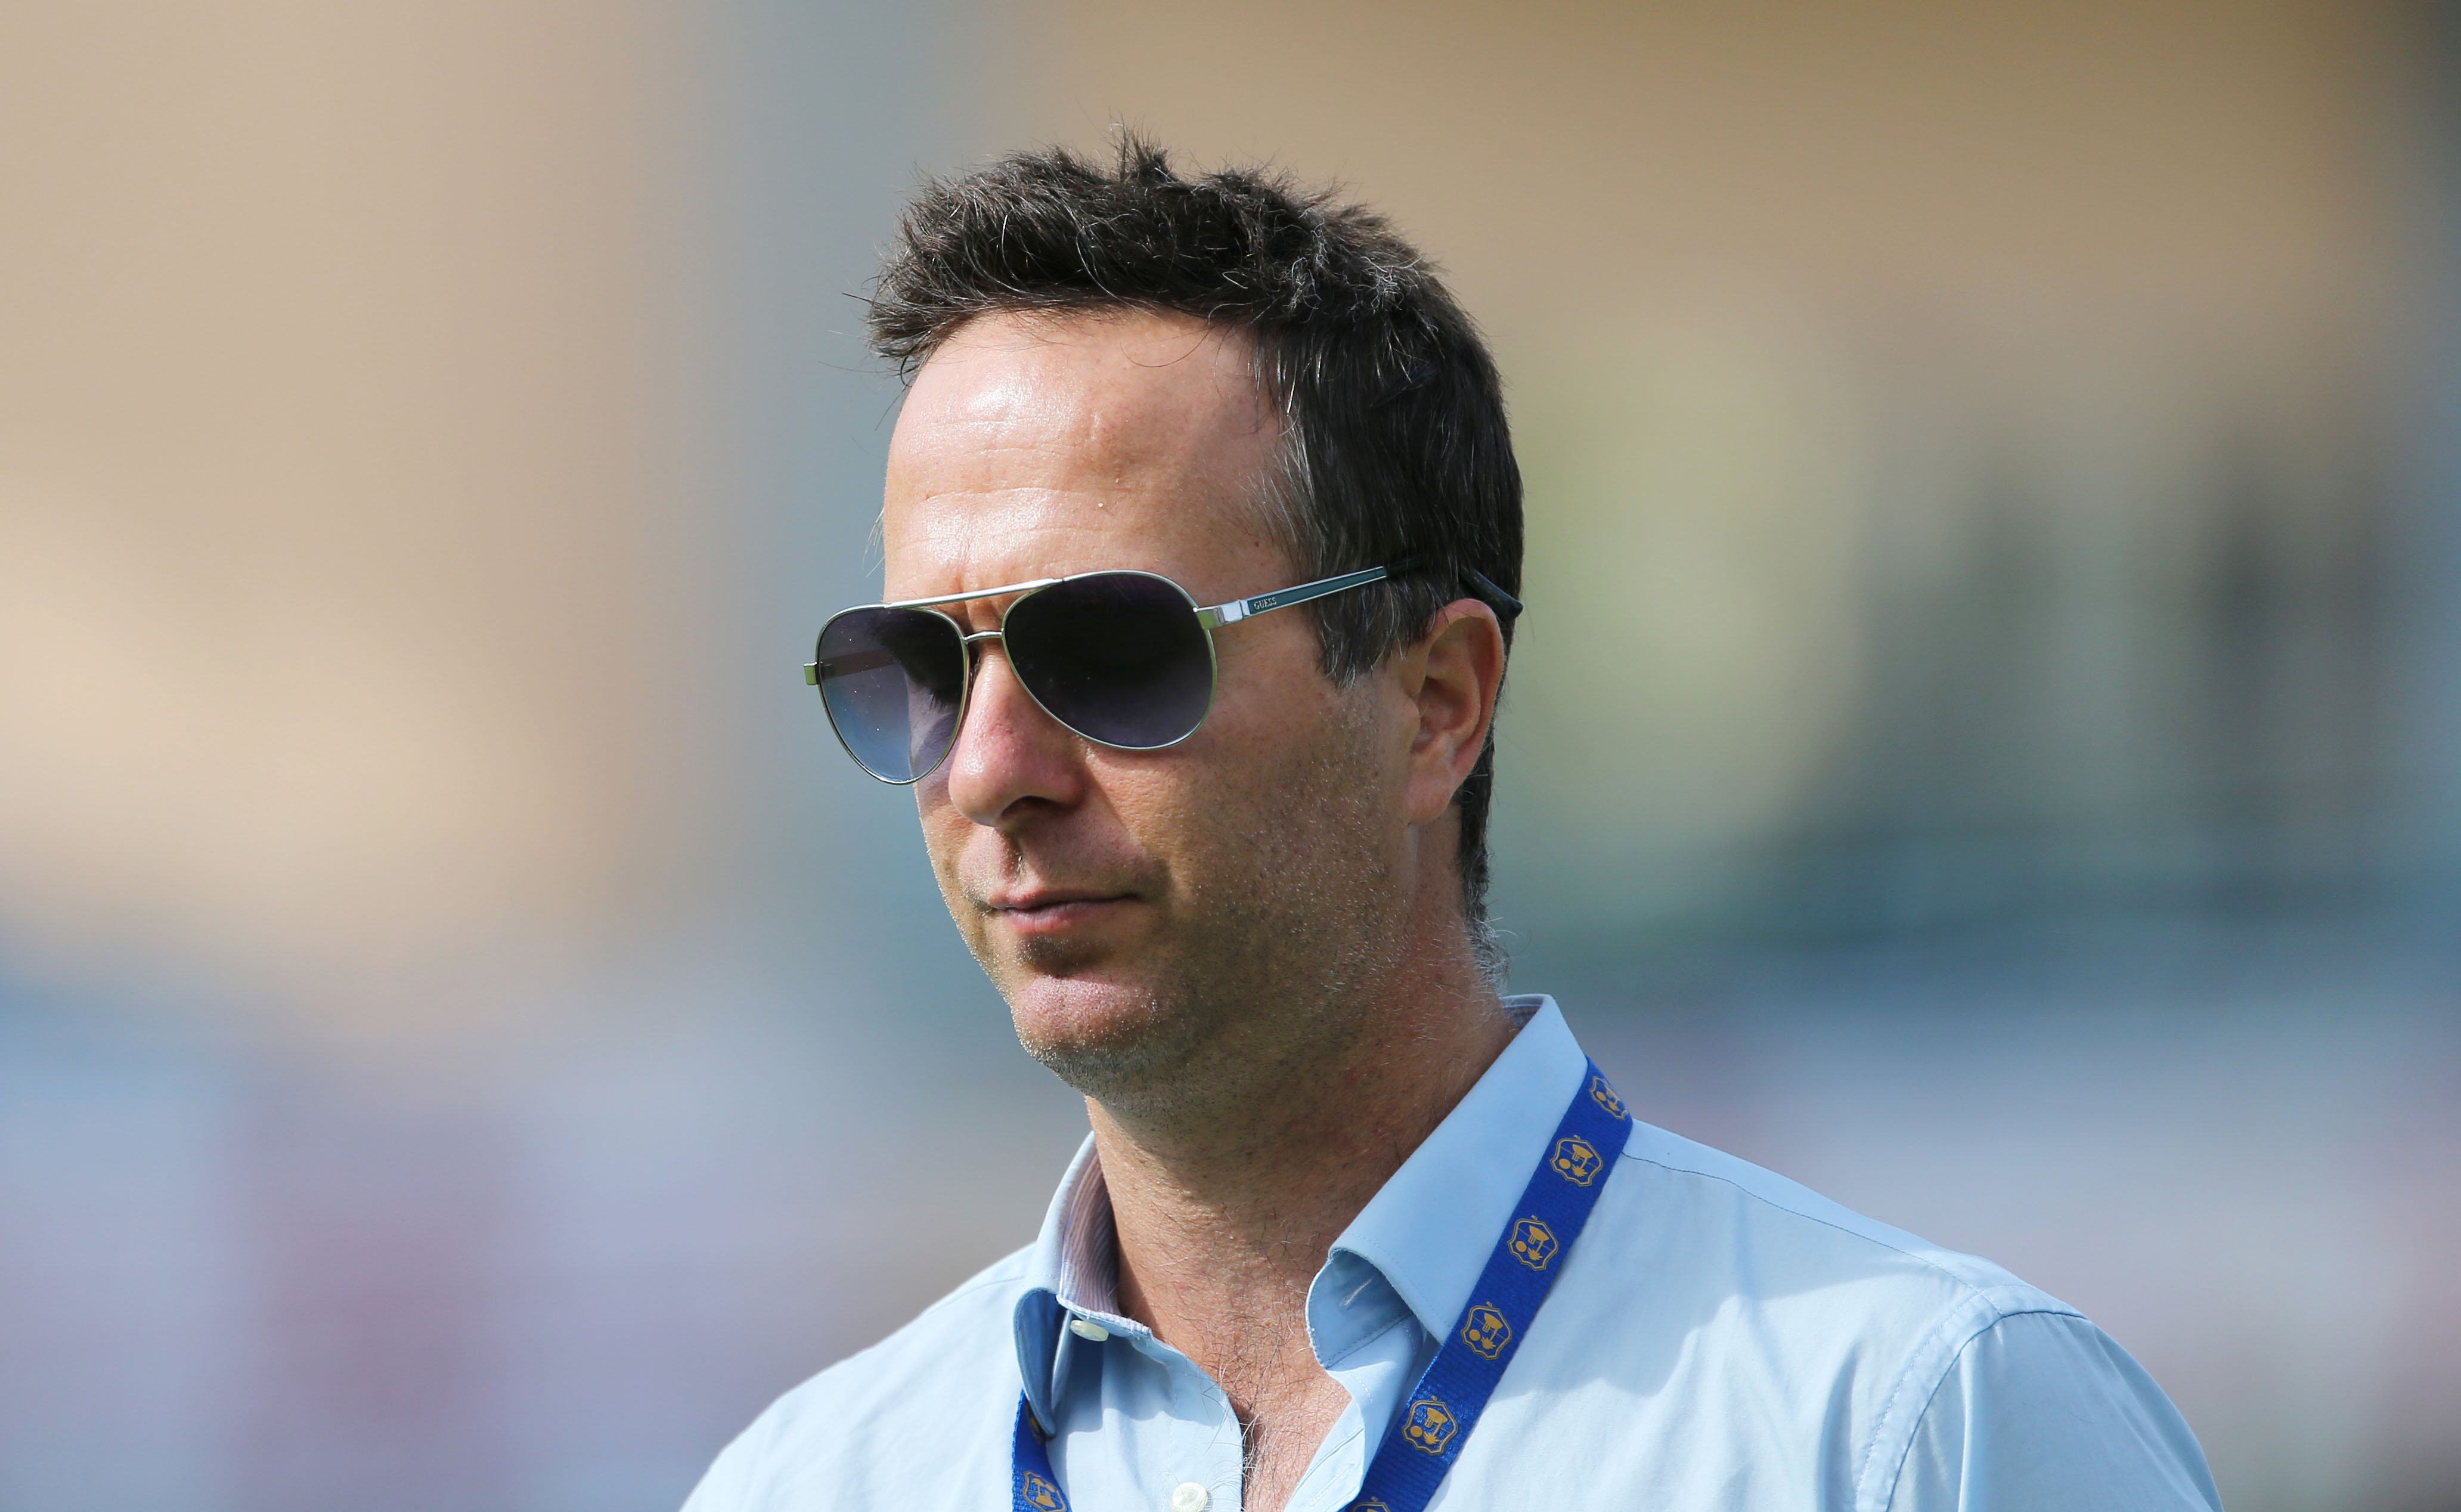 Cricket - West Indies v England - Second Test - National Cricket Ground, Grenada - 22/4/15
Television pundit and former England captain Michael Vaughan before the start of play
Action Images via Reuters / Jason O'Brien
Livepic